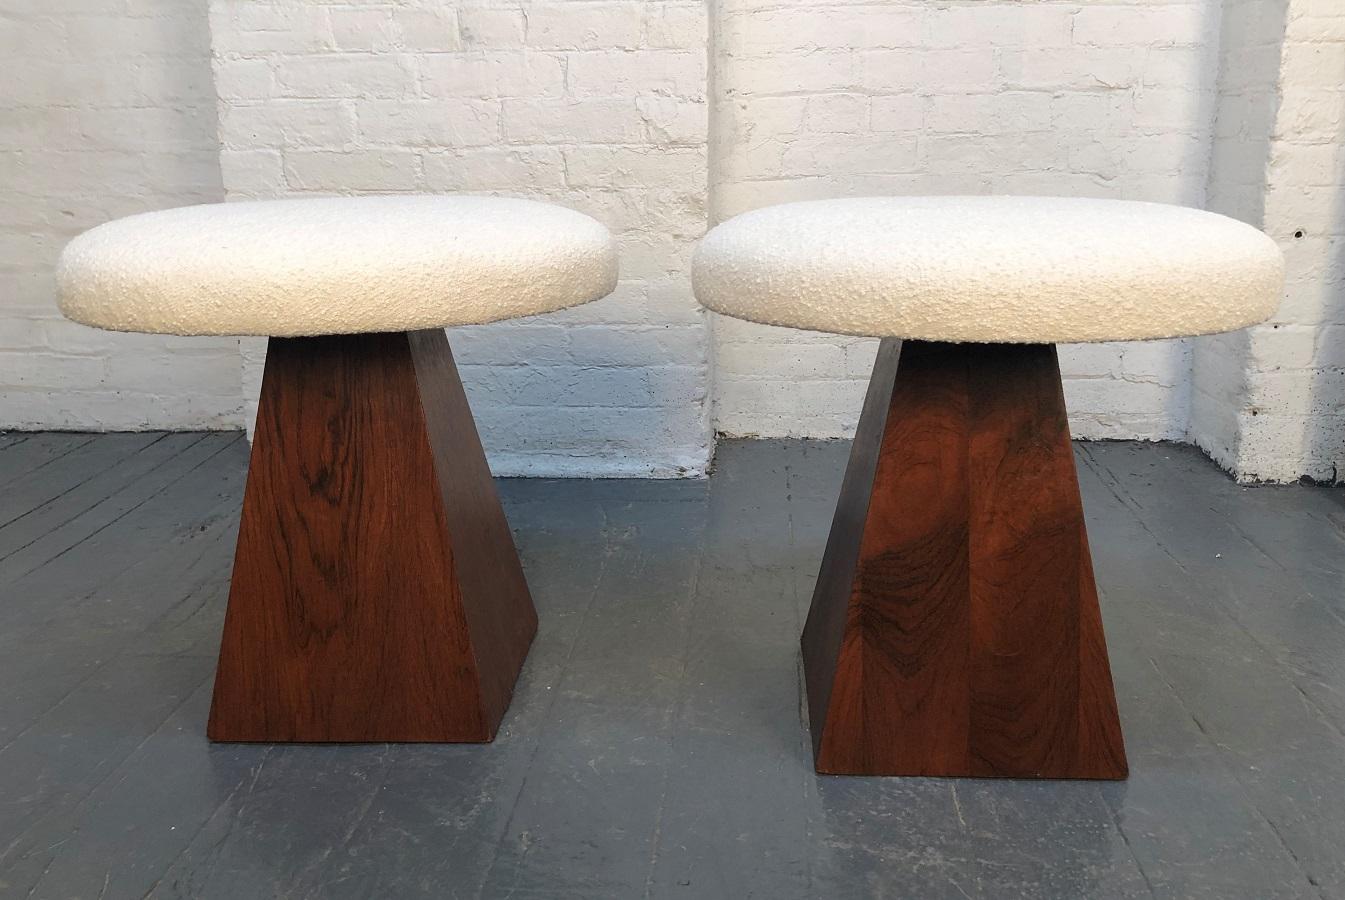 Pair of Mid-Century Modern rosewood stools. Nice rosewood grain having triangular shaped bases with round off-white bouclé fabric covered cushioned seats.